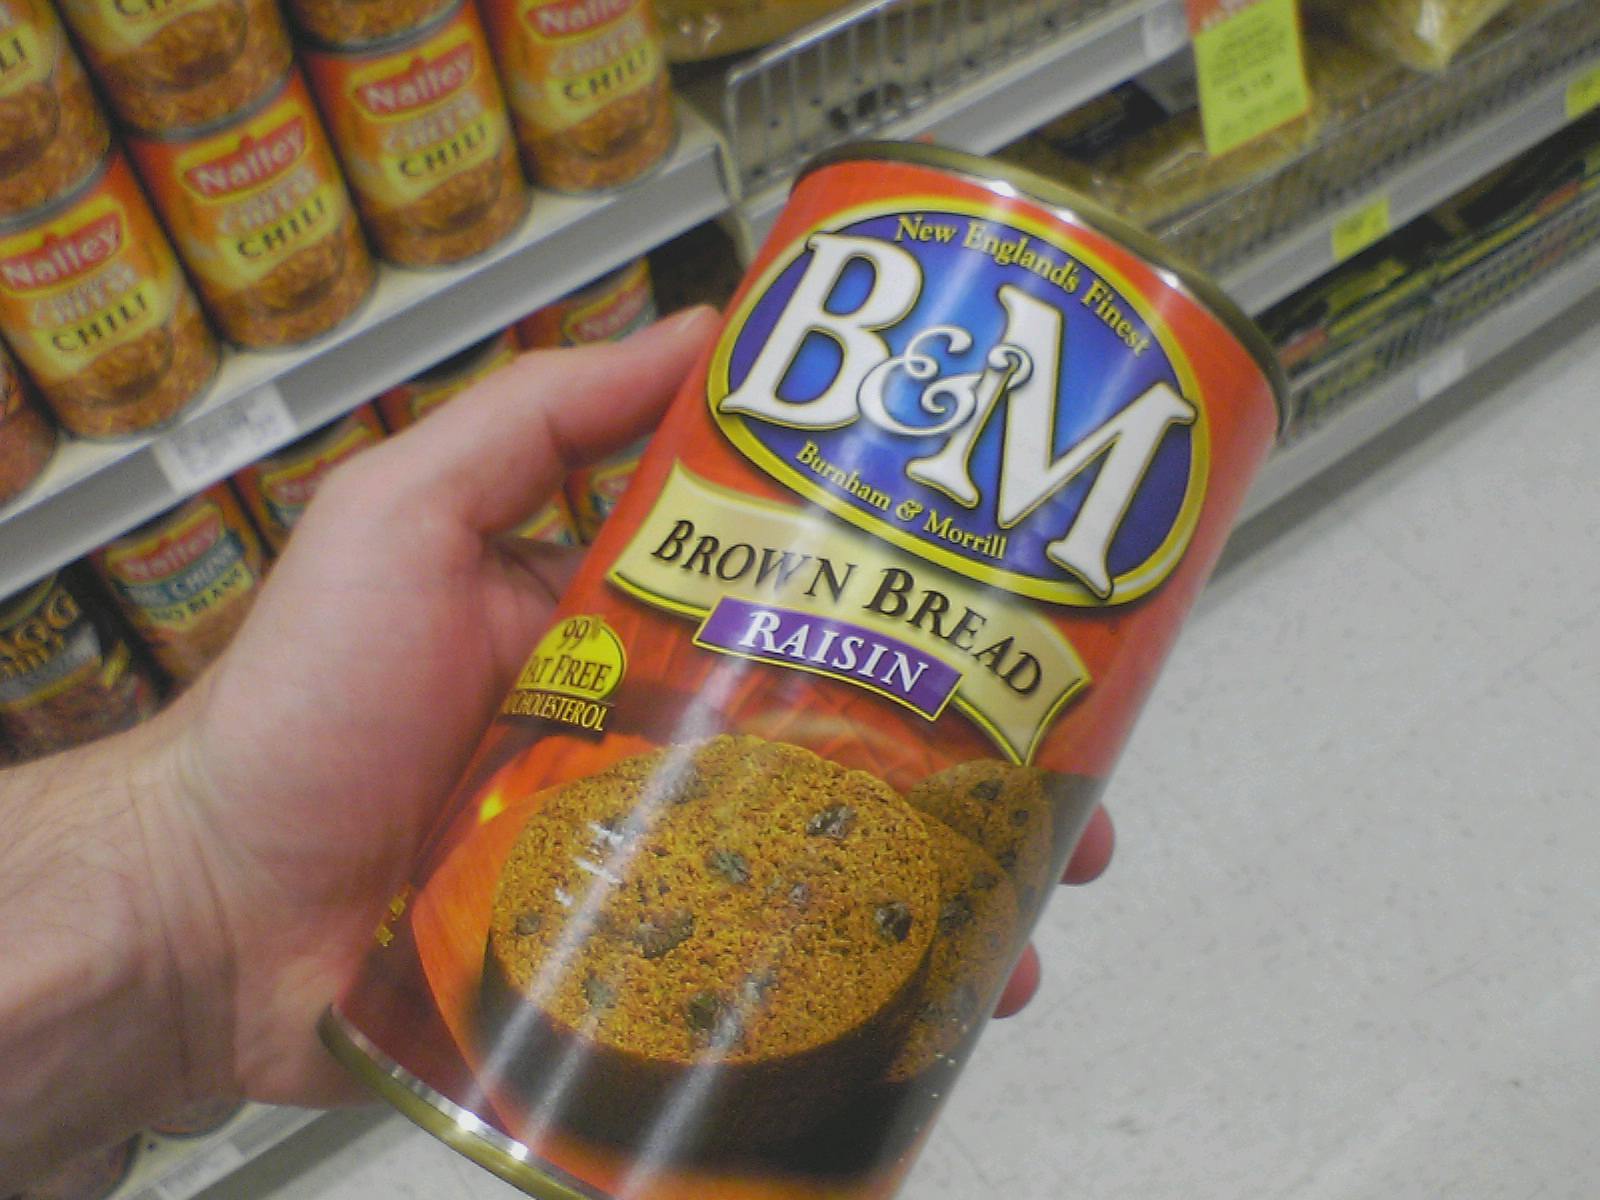 a hand holding a can of b & m coffee at a store